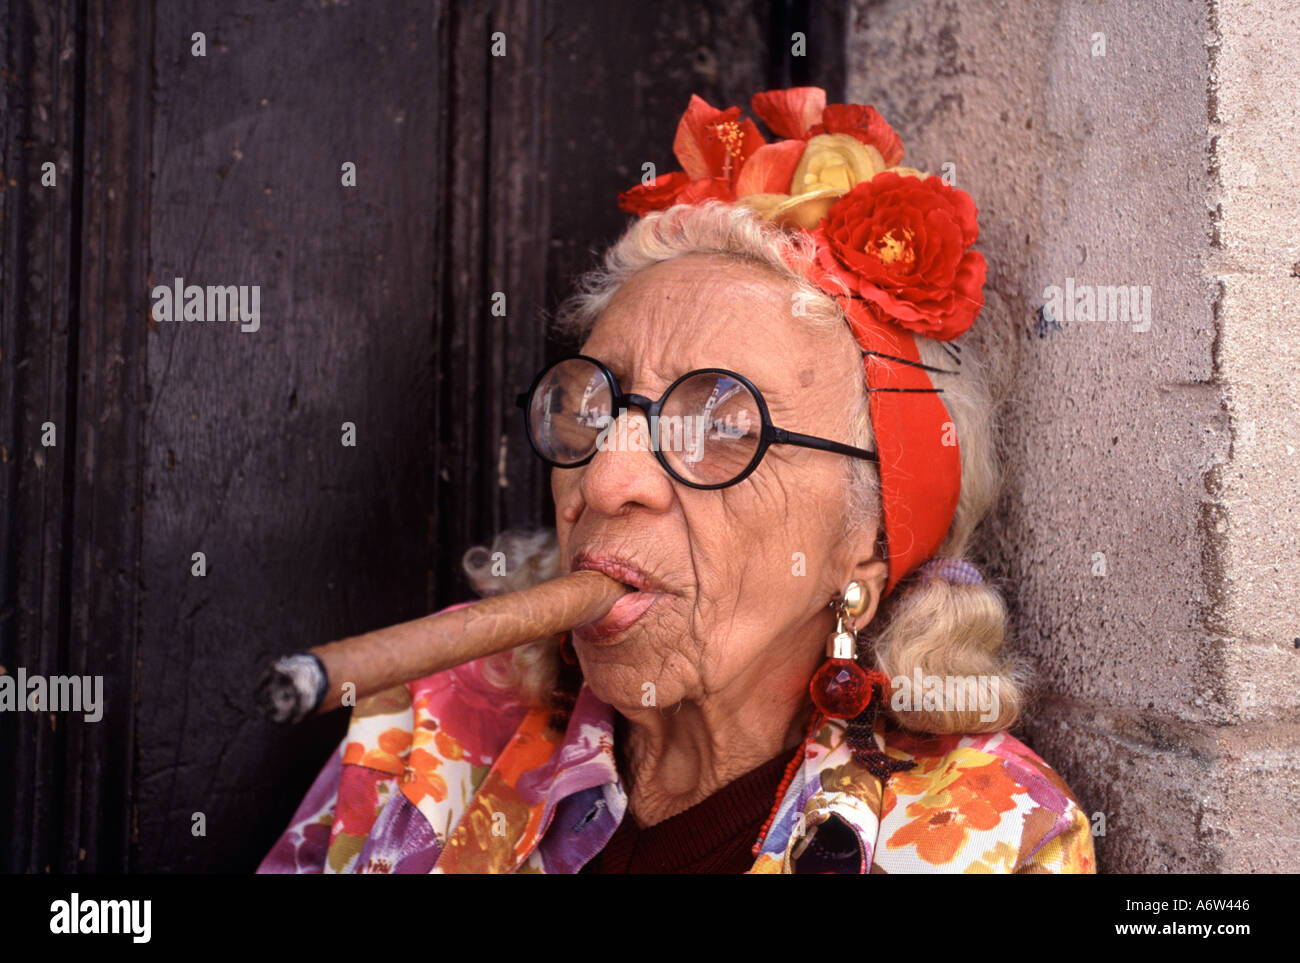 Cuba Havana woman smoking a cigar in a doorway in the old town Stock Photo